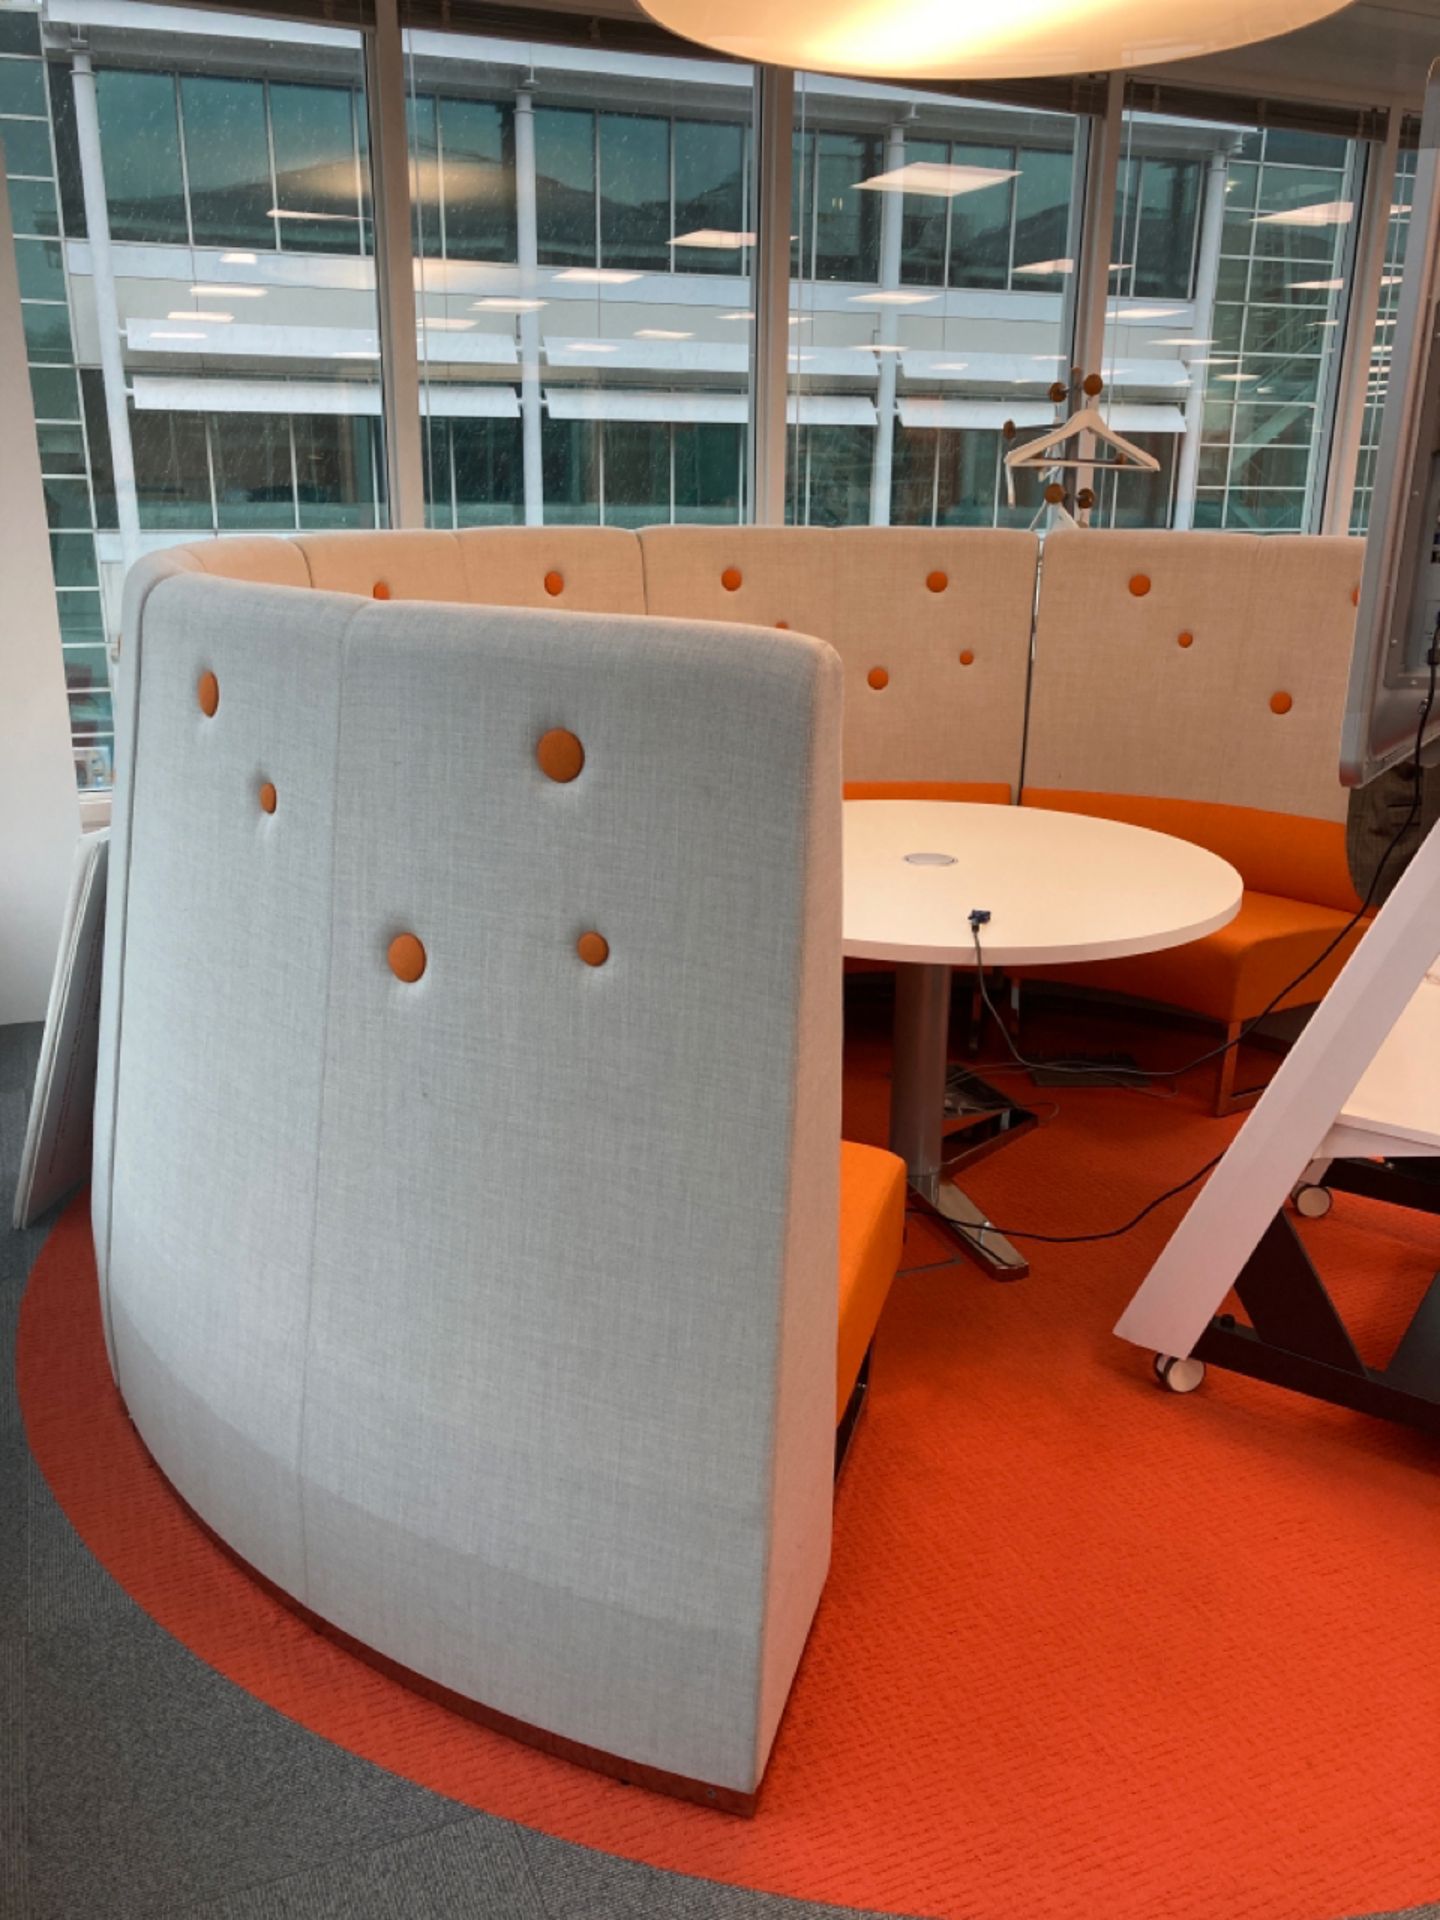 Large Fabric Circular Seating Bench With Table